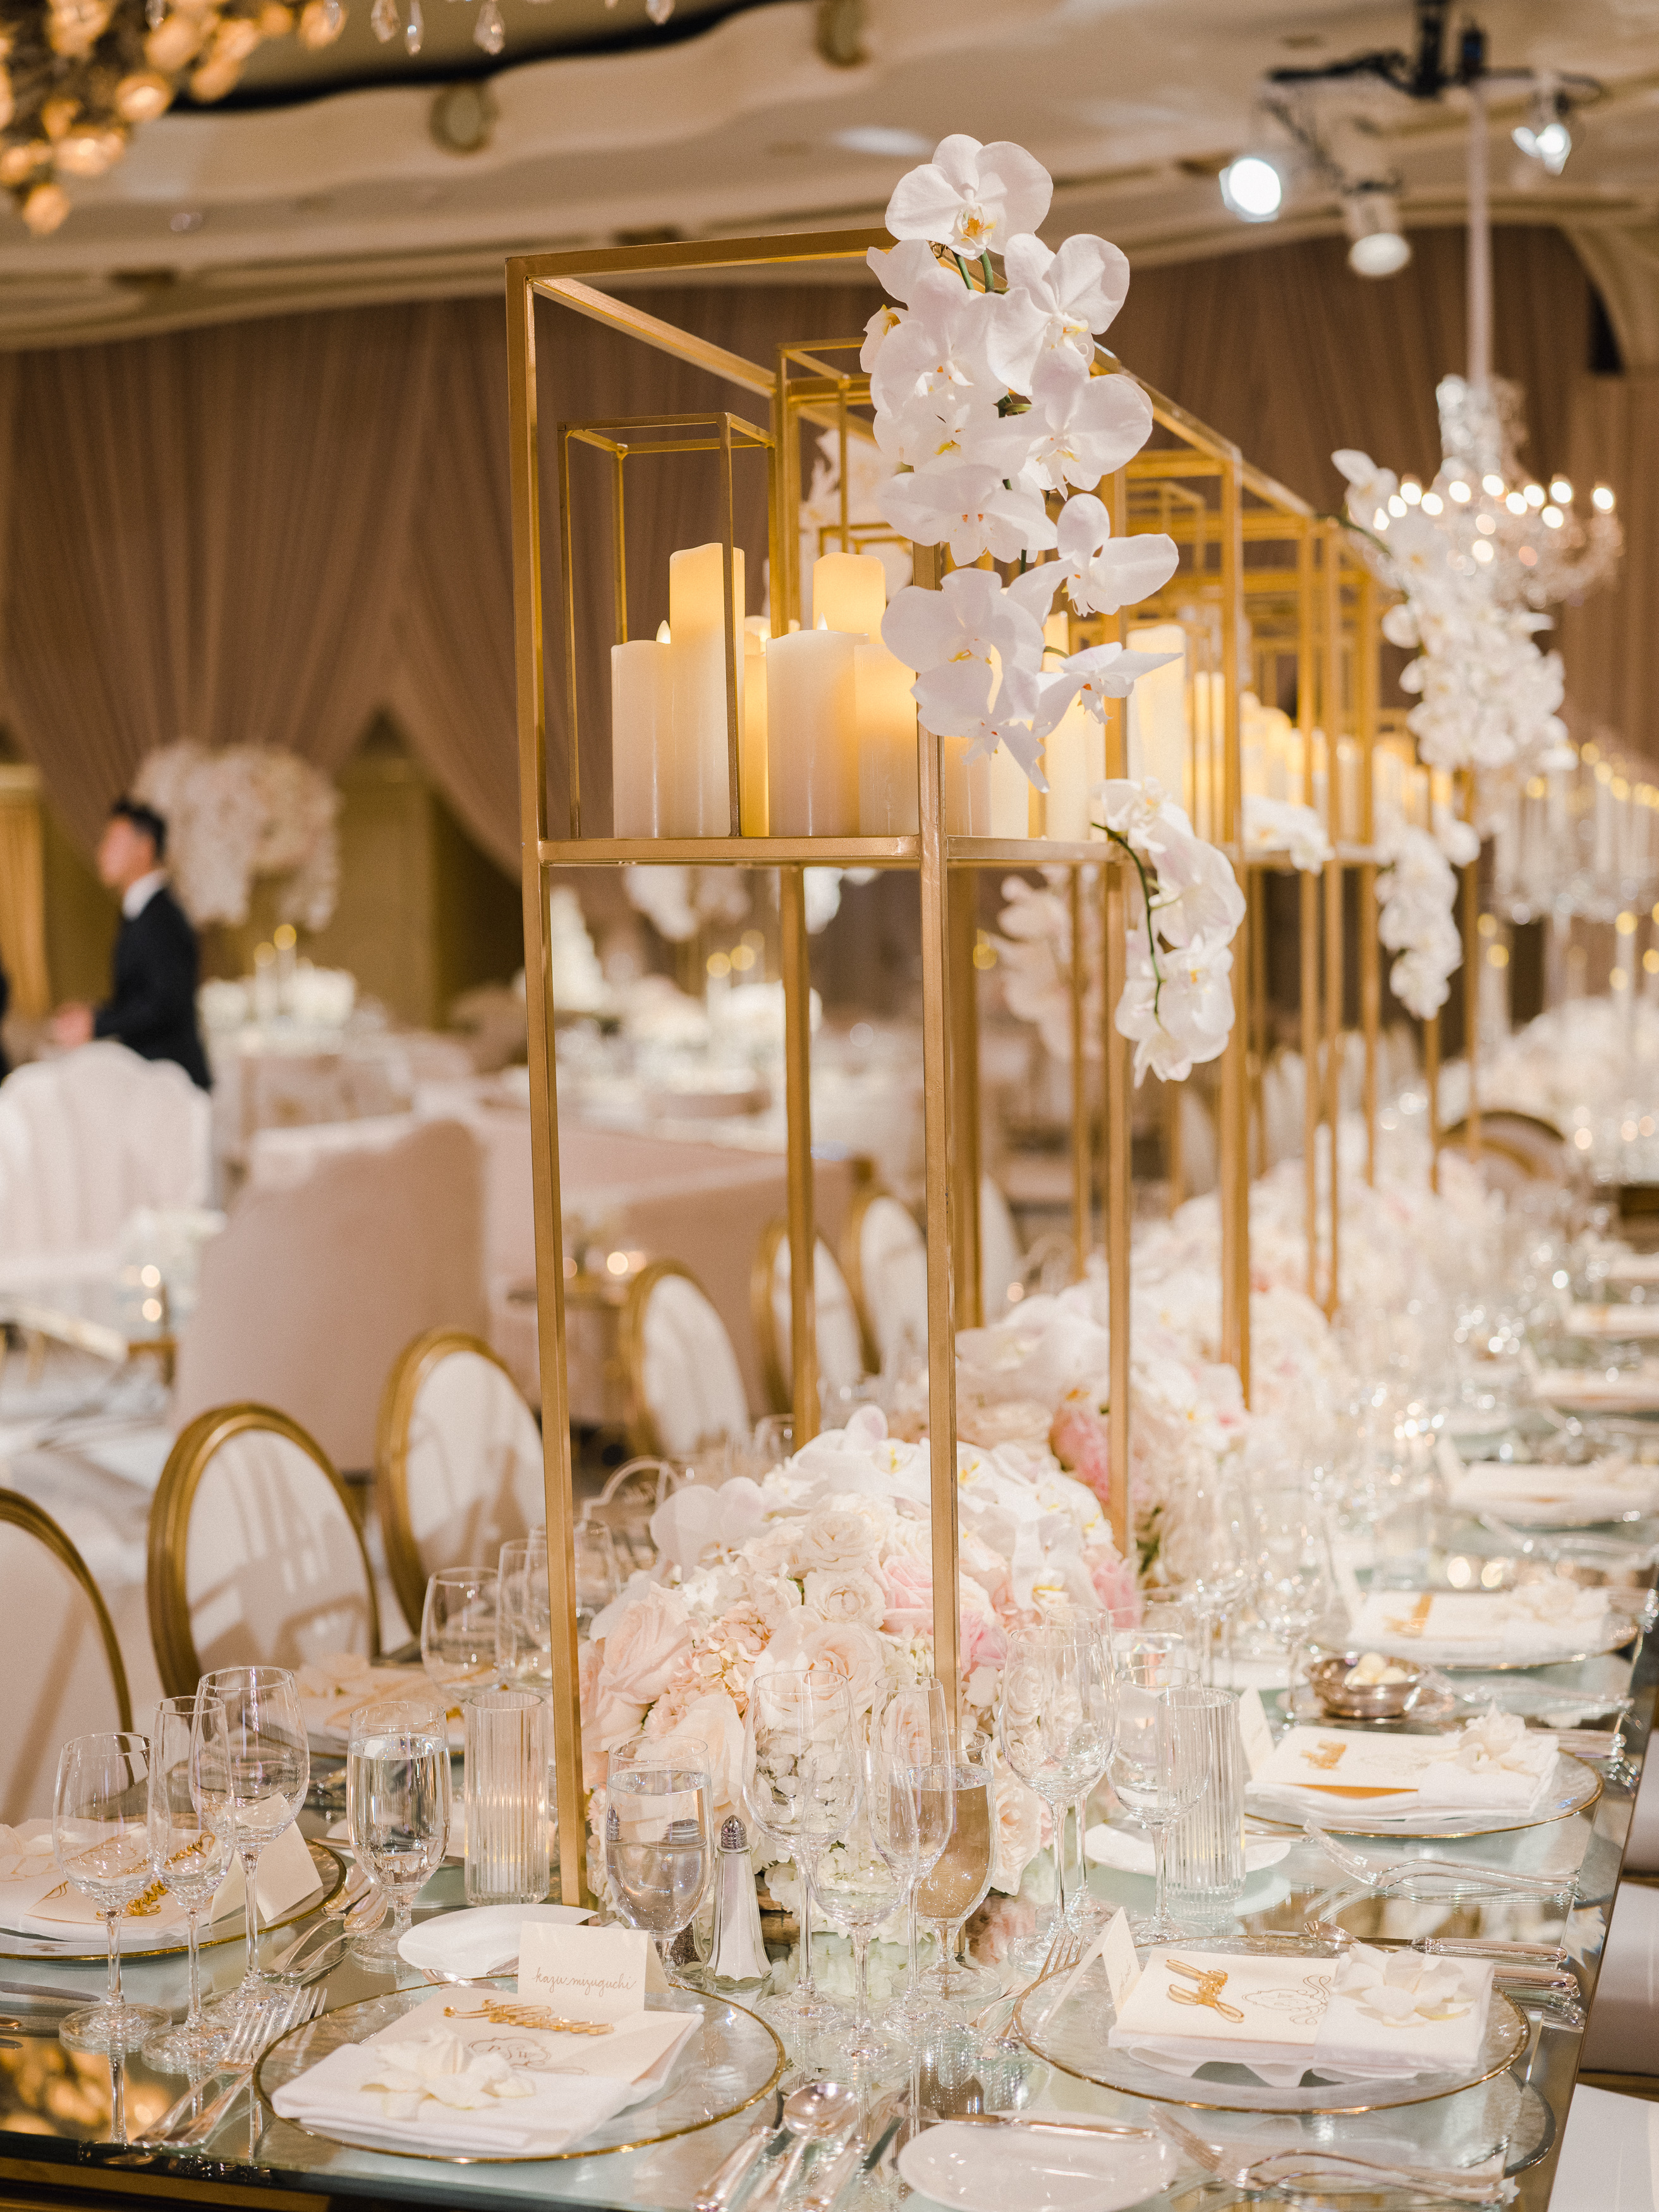 Image of long table setting with cascading orchids and candles